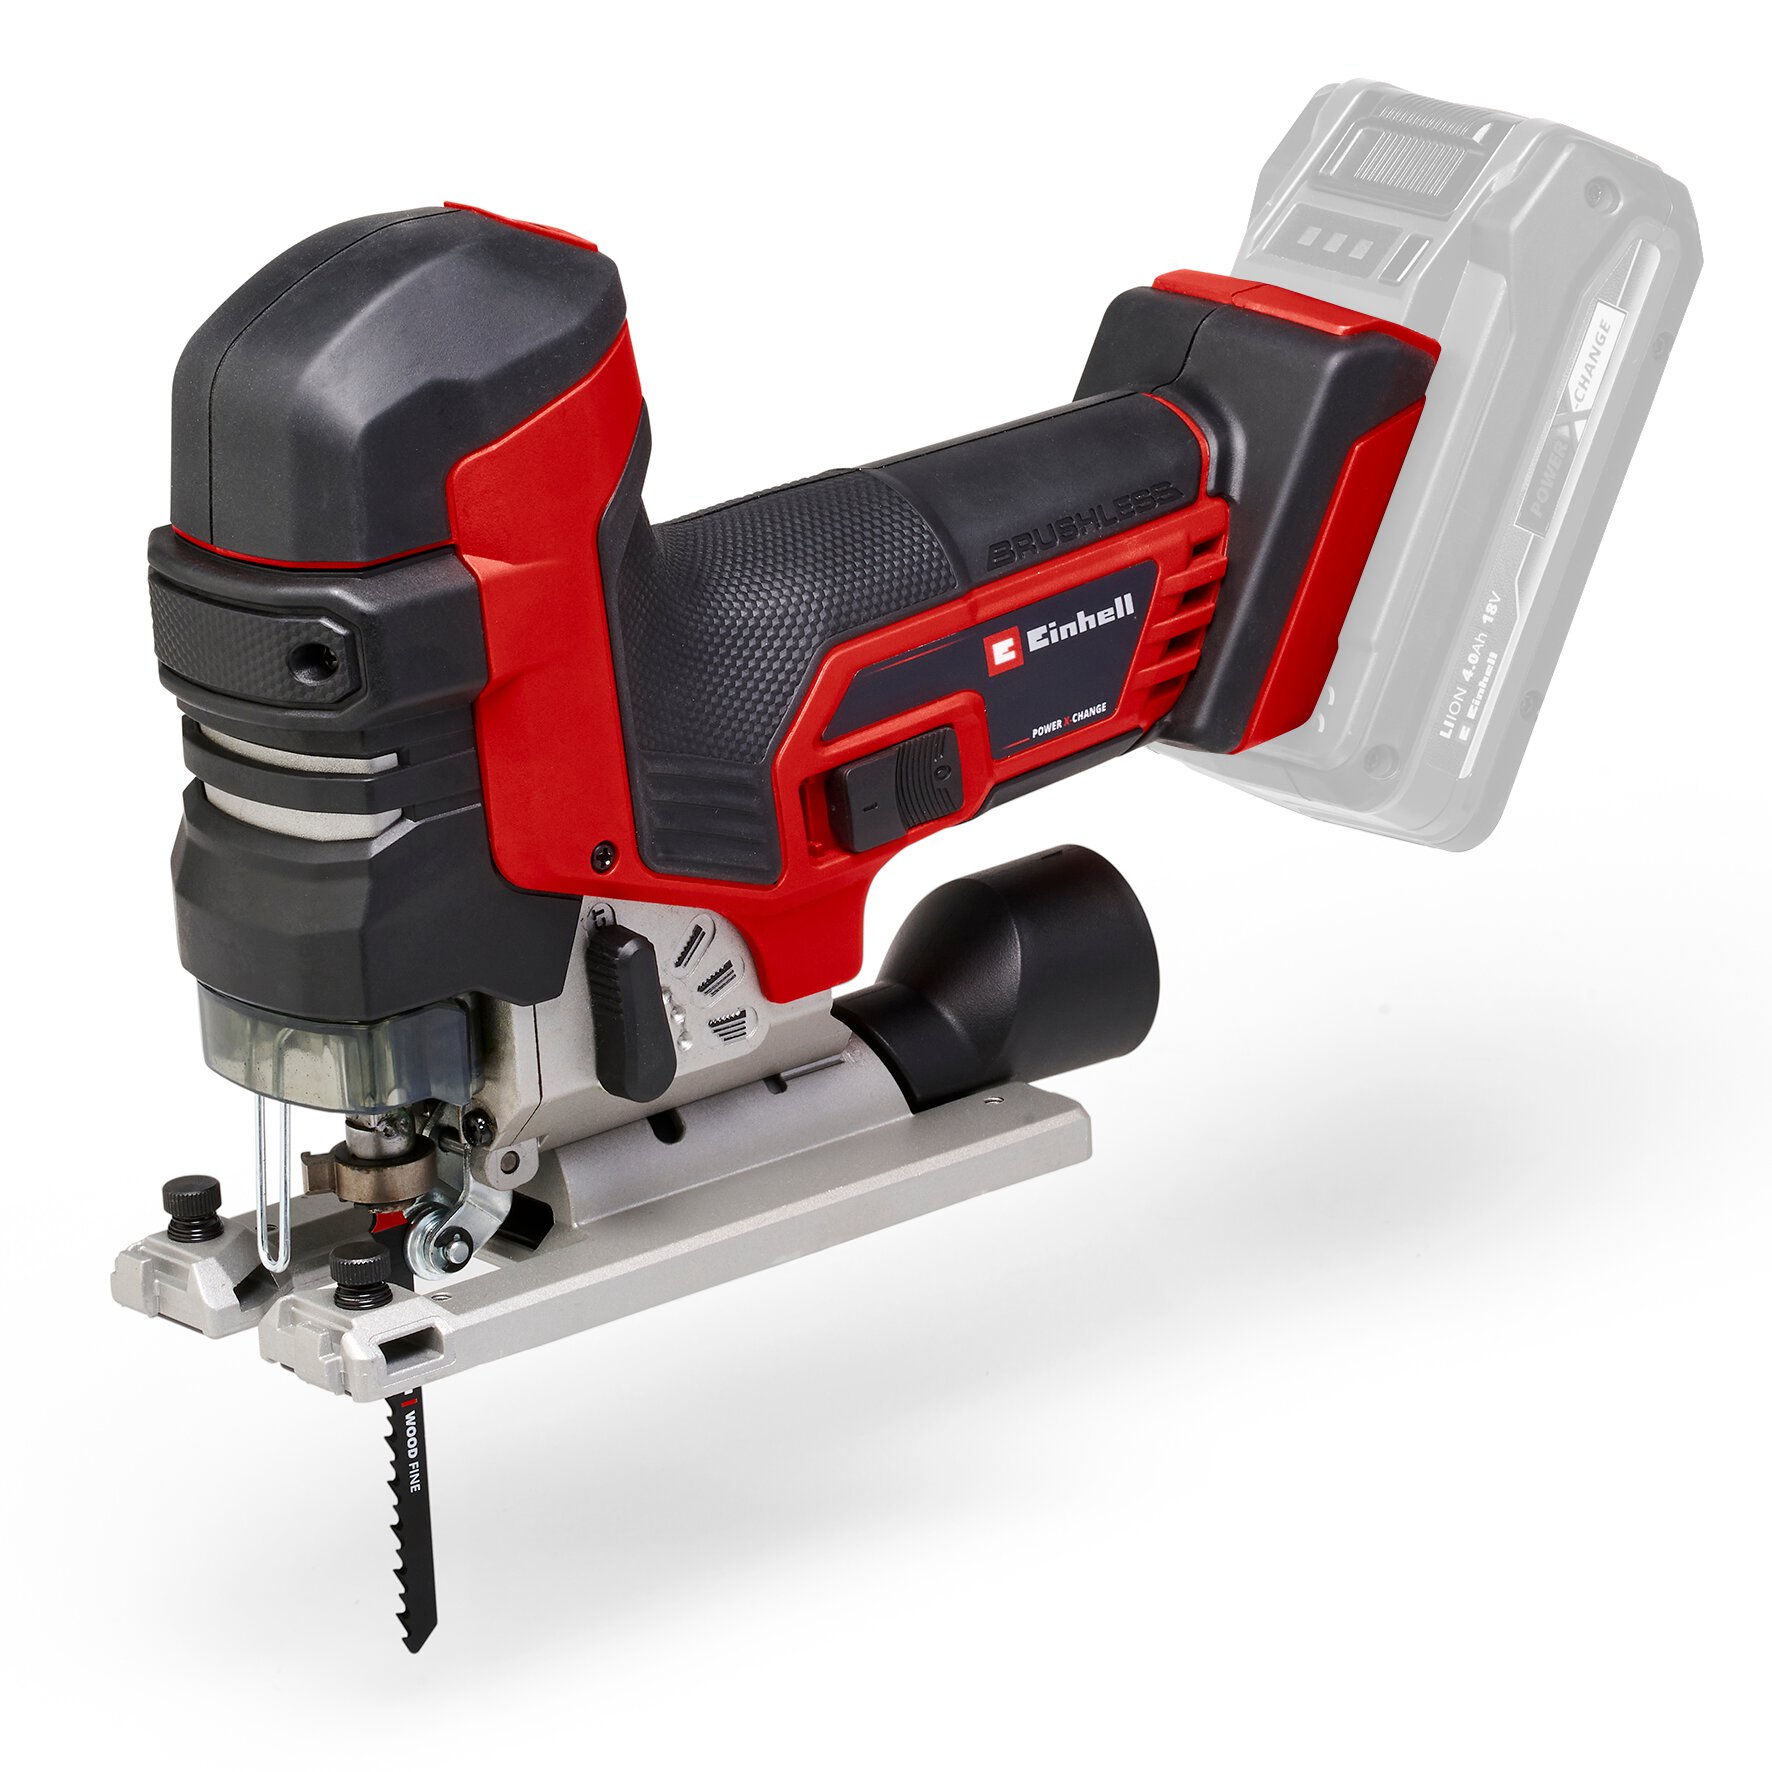 einhell-professional-cordless-jig-saw-4321265-productimage-001